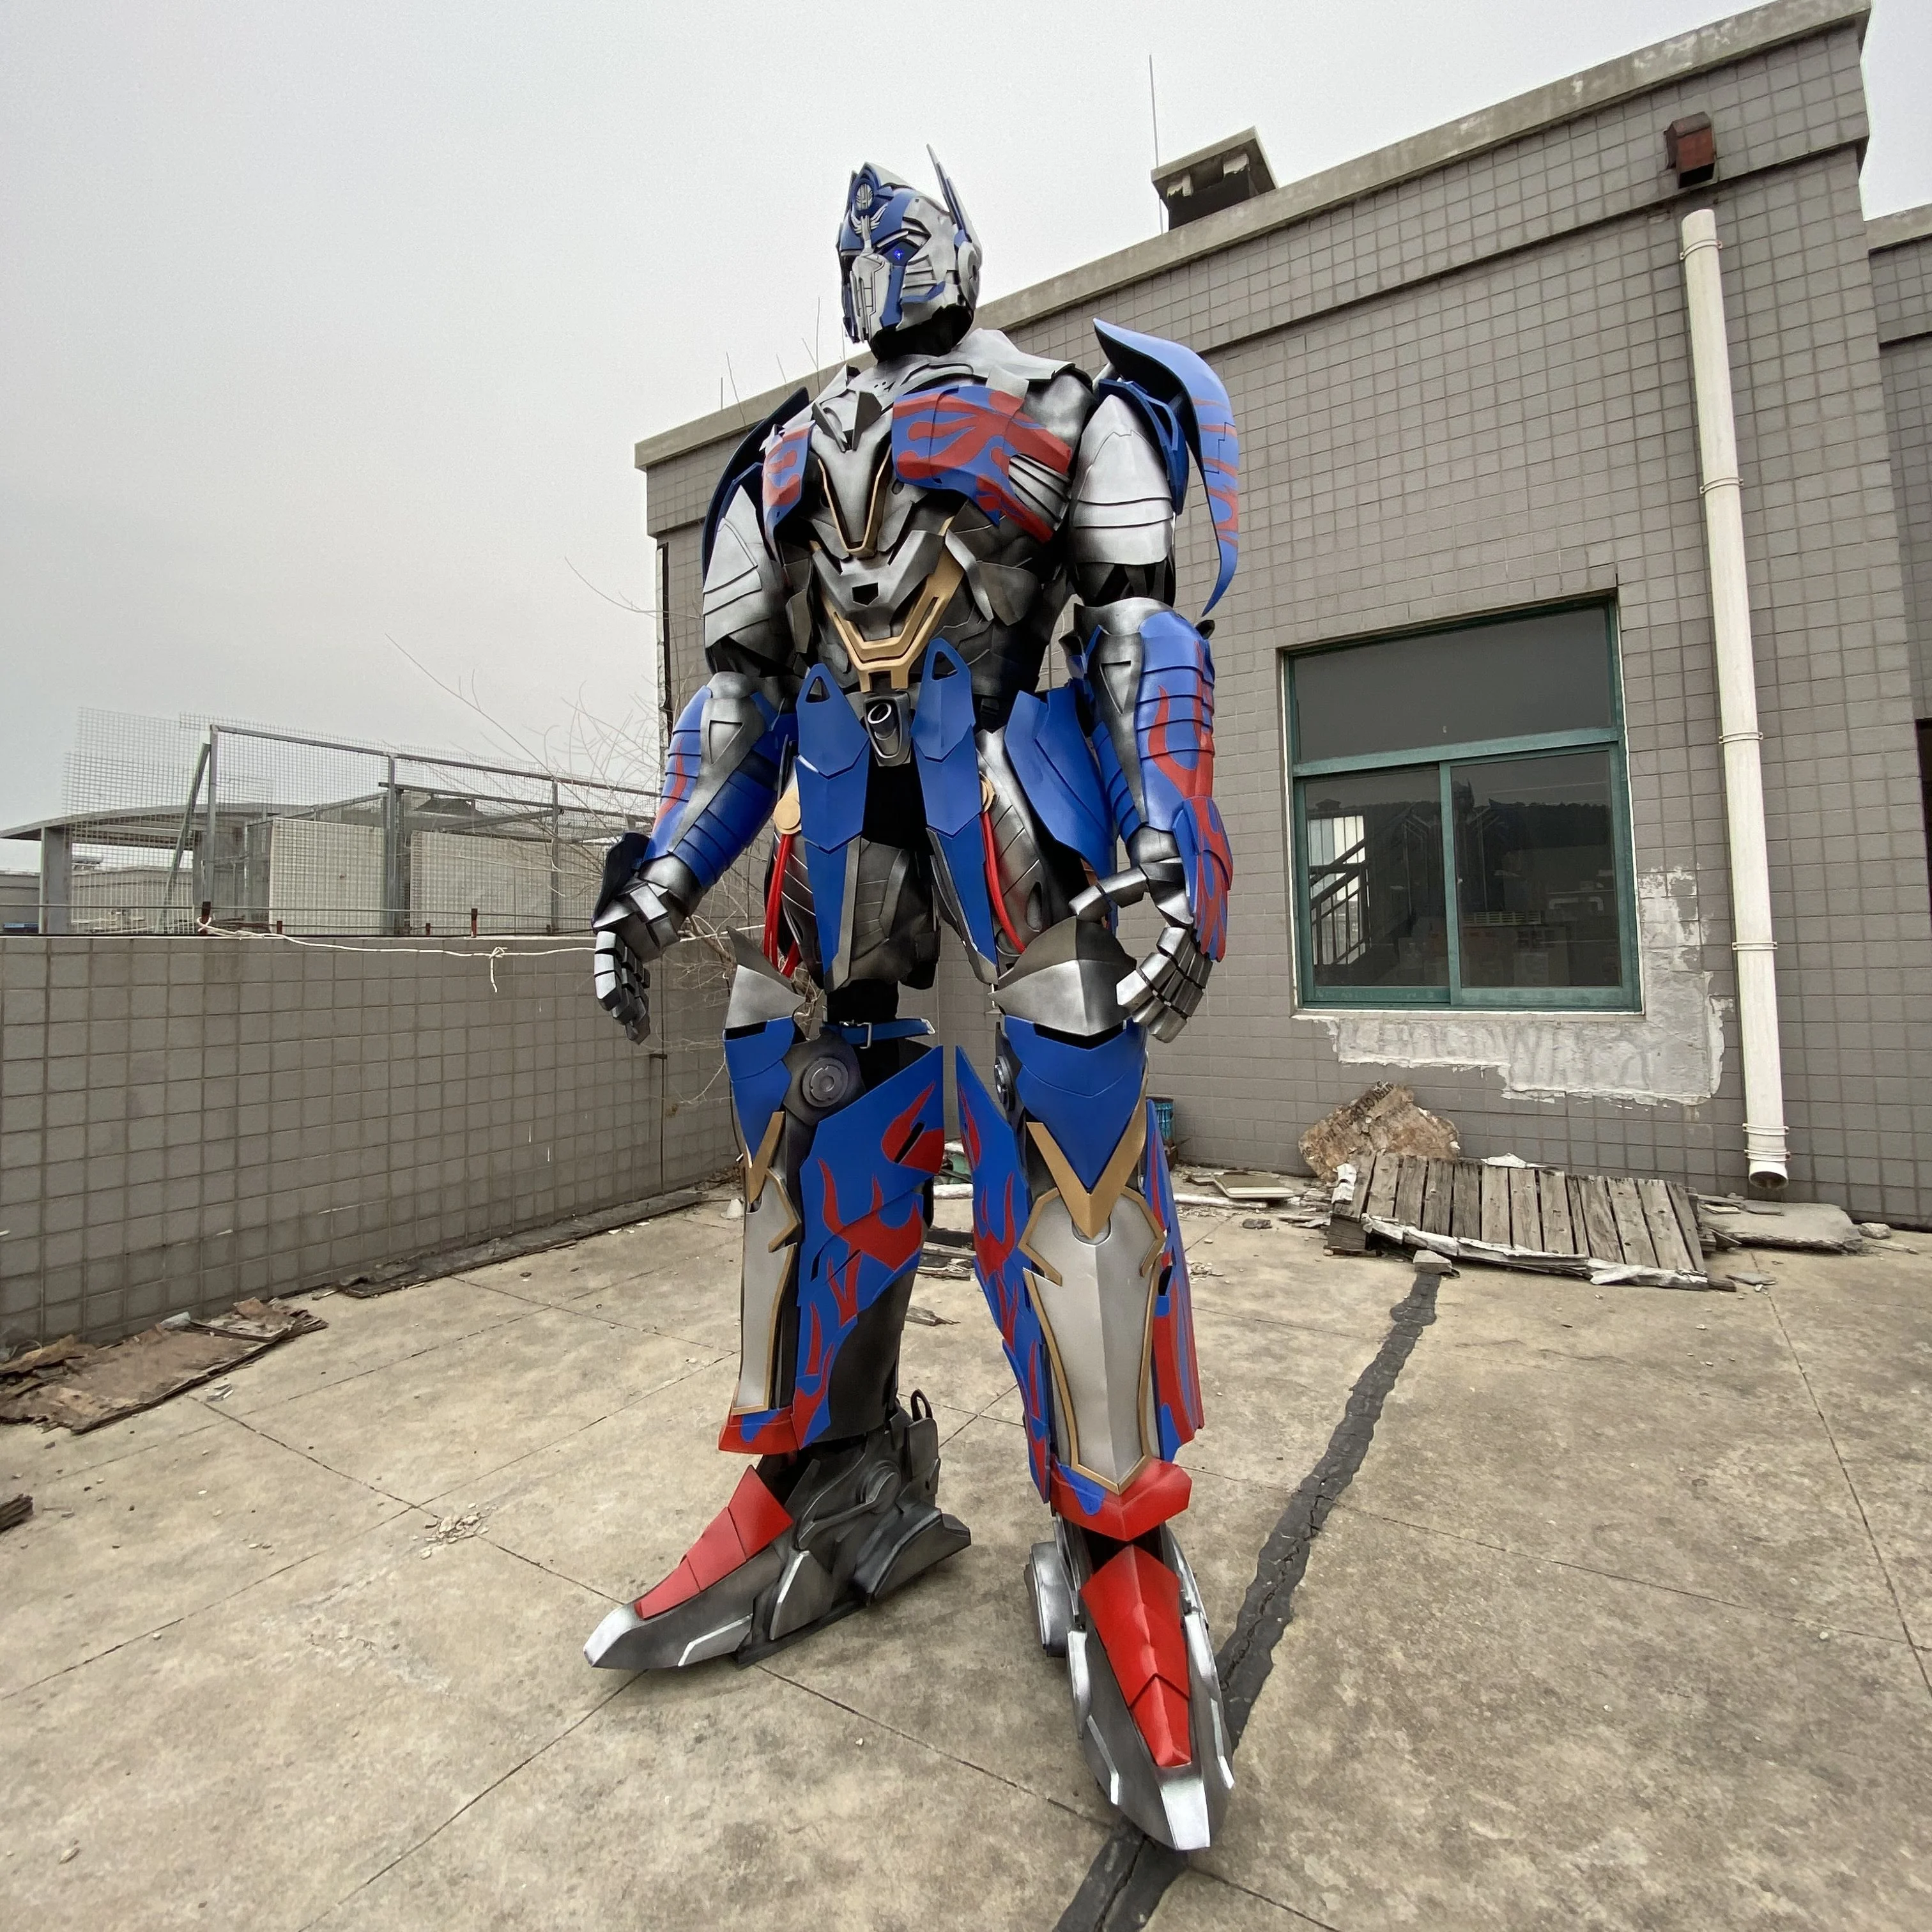 Adult Wear Cosplay Realistic Transforme Robot Costume Designers  Hand-crafted The Wearable Robot Optimus Prime - Smart Remote Control -  AliExpress